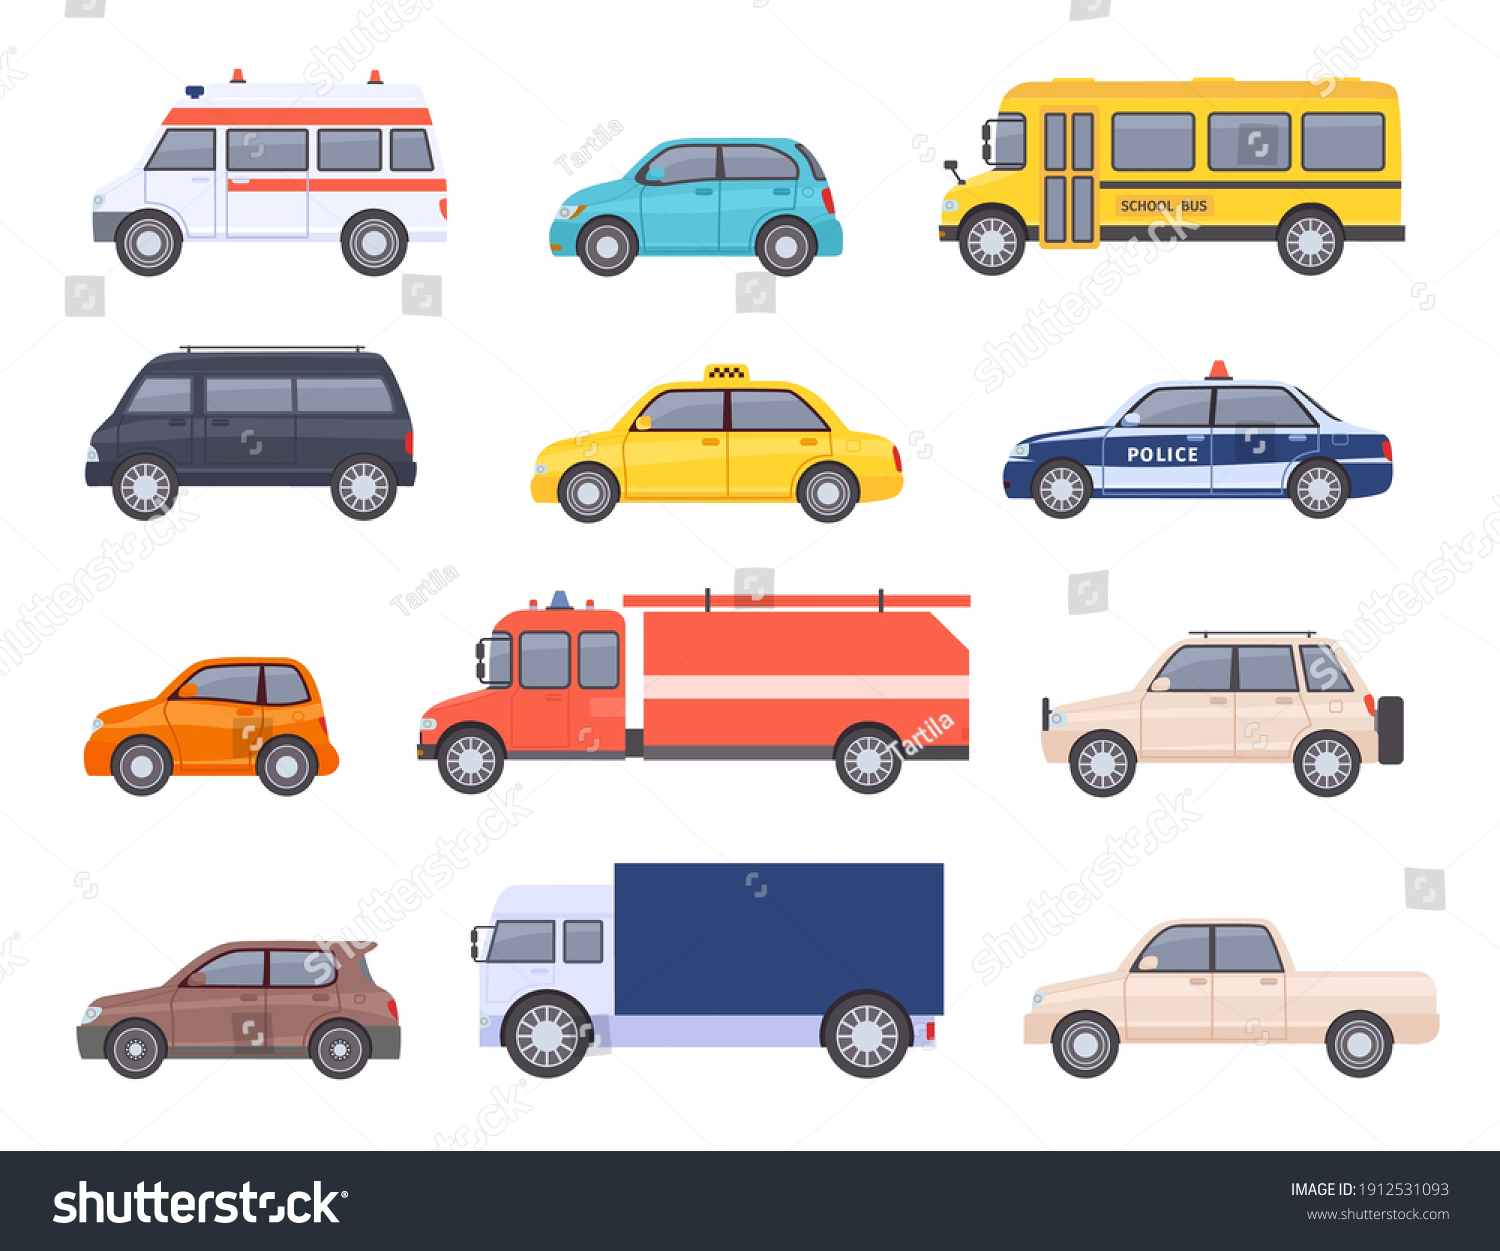 SVG of City transport cars. Urban car and vehicles, taxi, school bus, ambulance, fire engine, police and pickup truck. Flat automobile vector set. Isolated public cars for first aid transportation svg